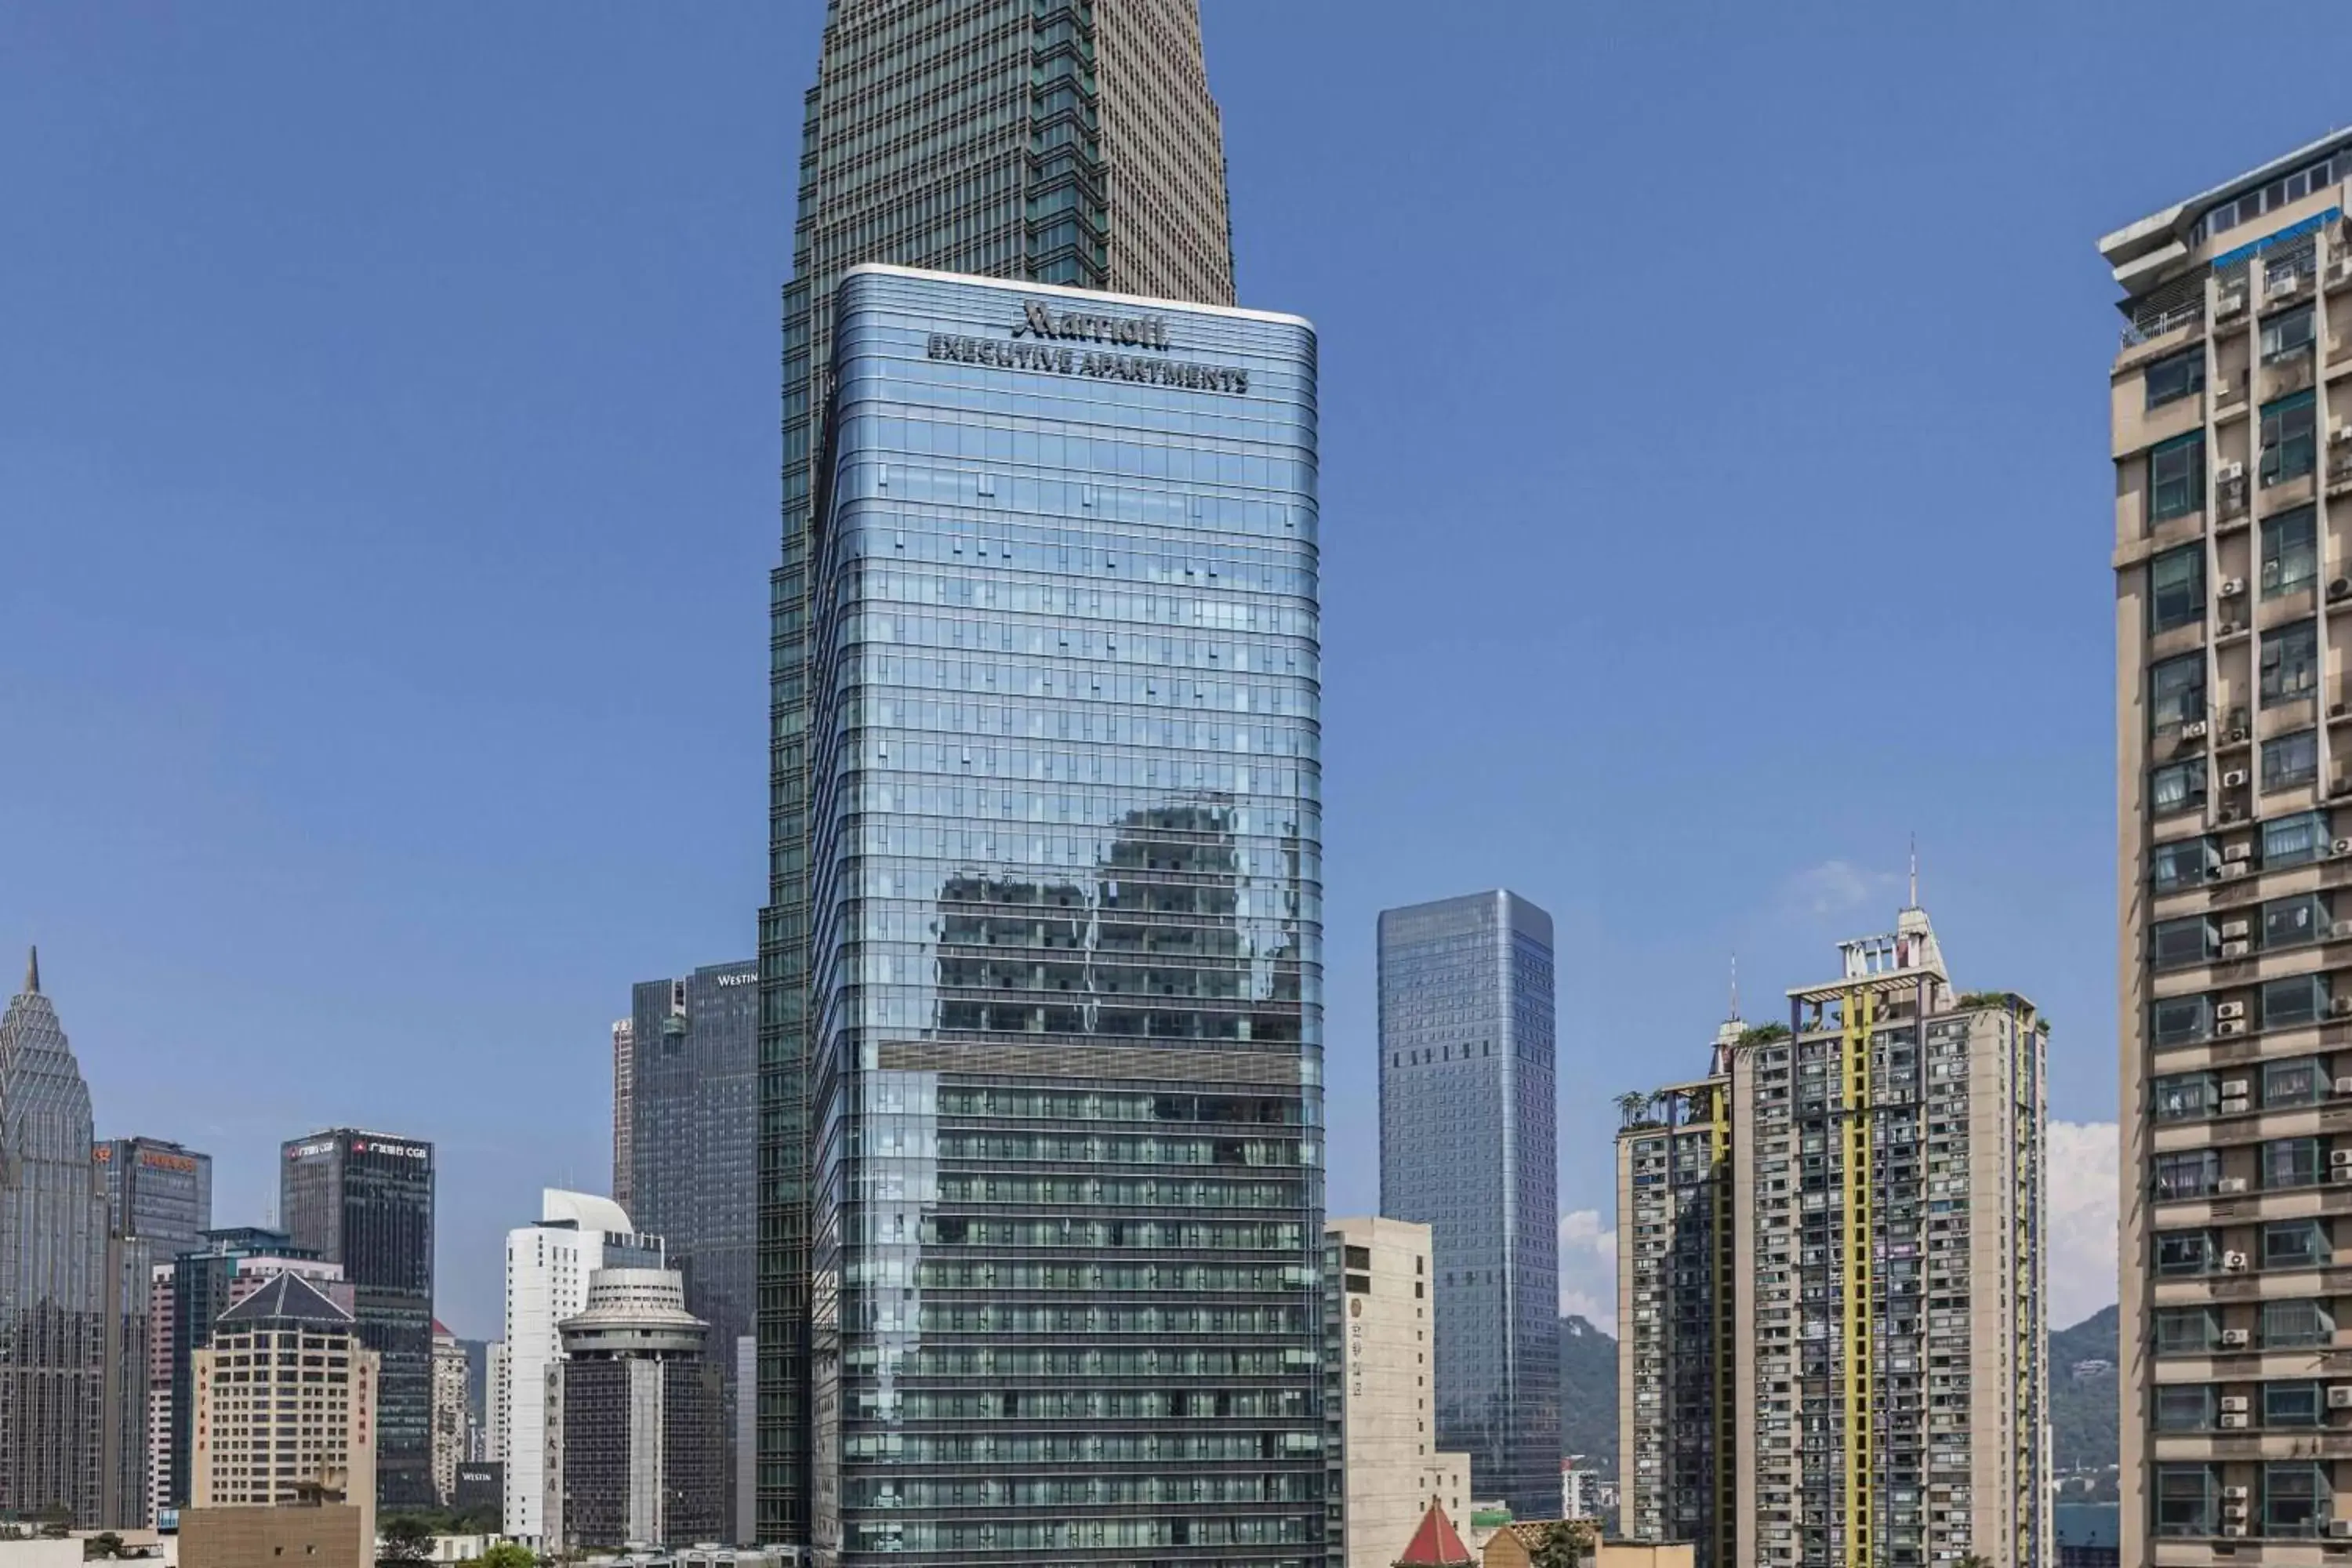 Property building in Marriott Executive Apartments Chongqing